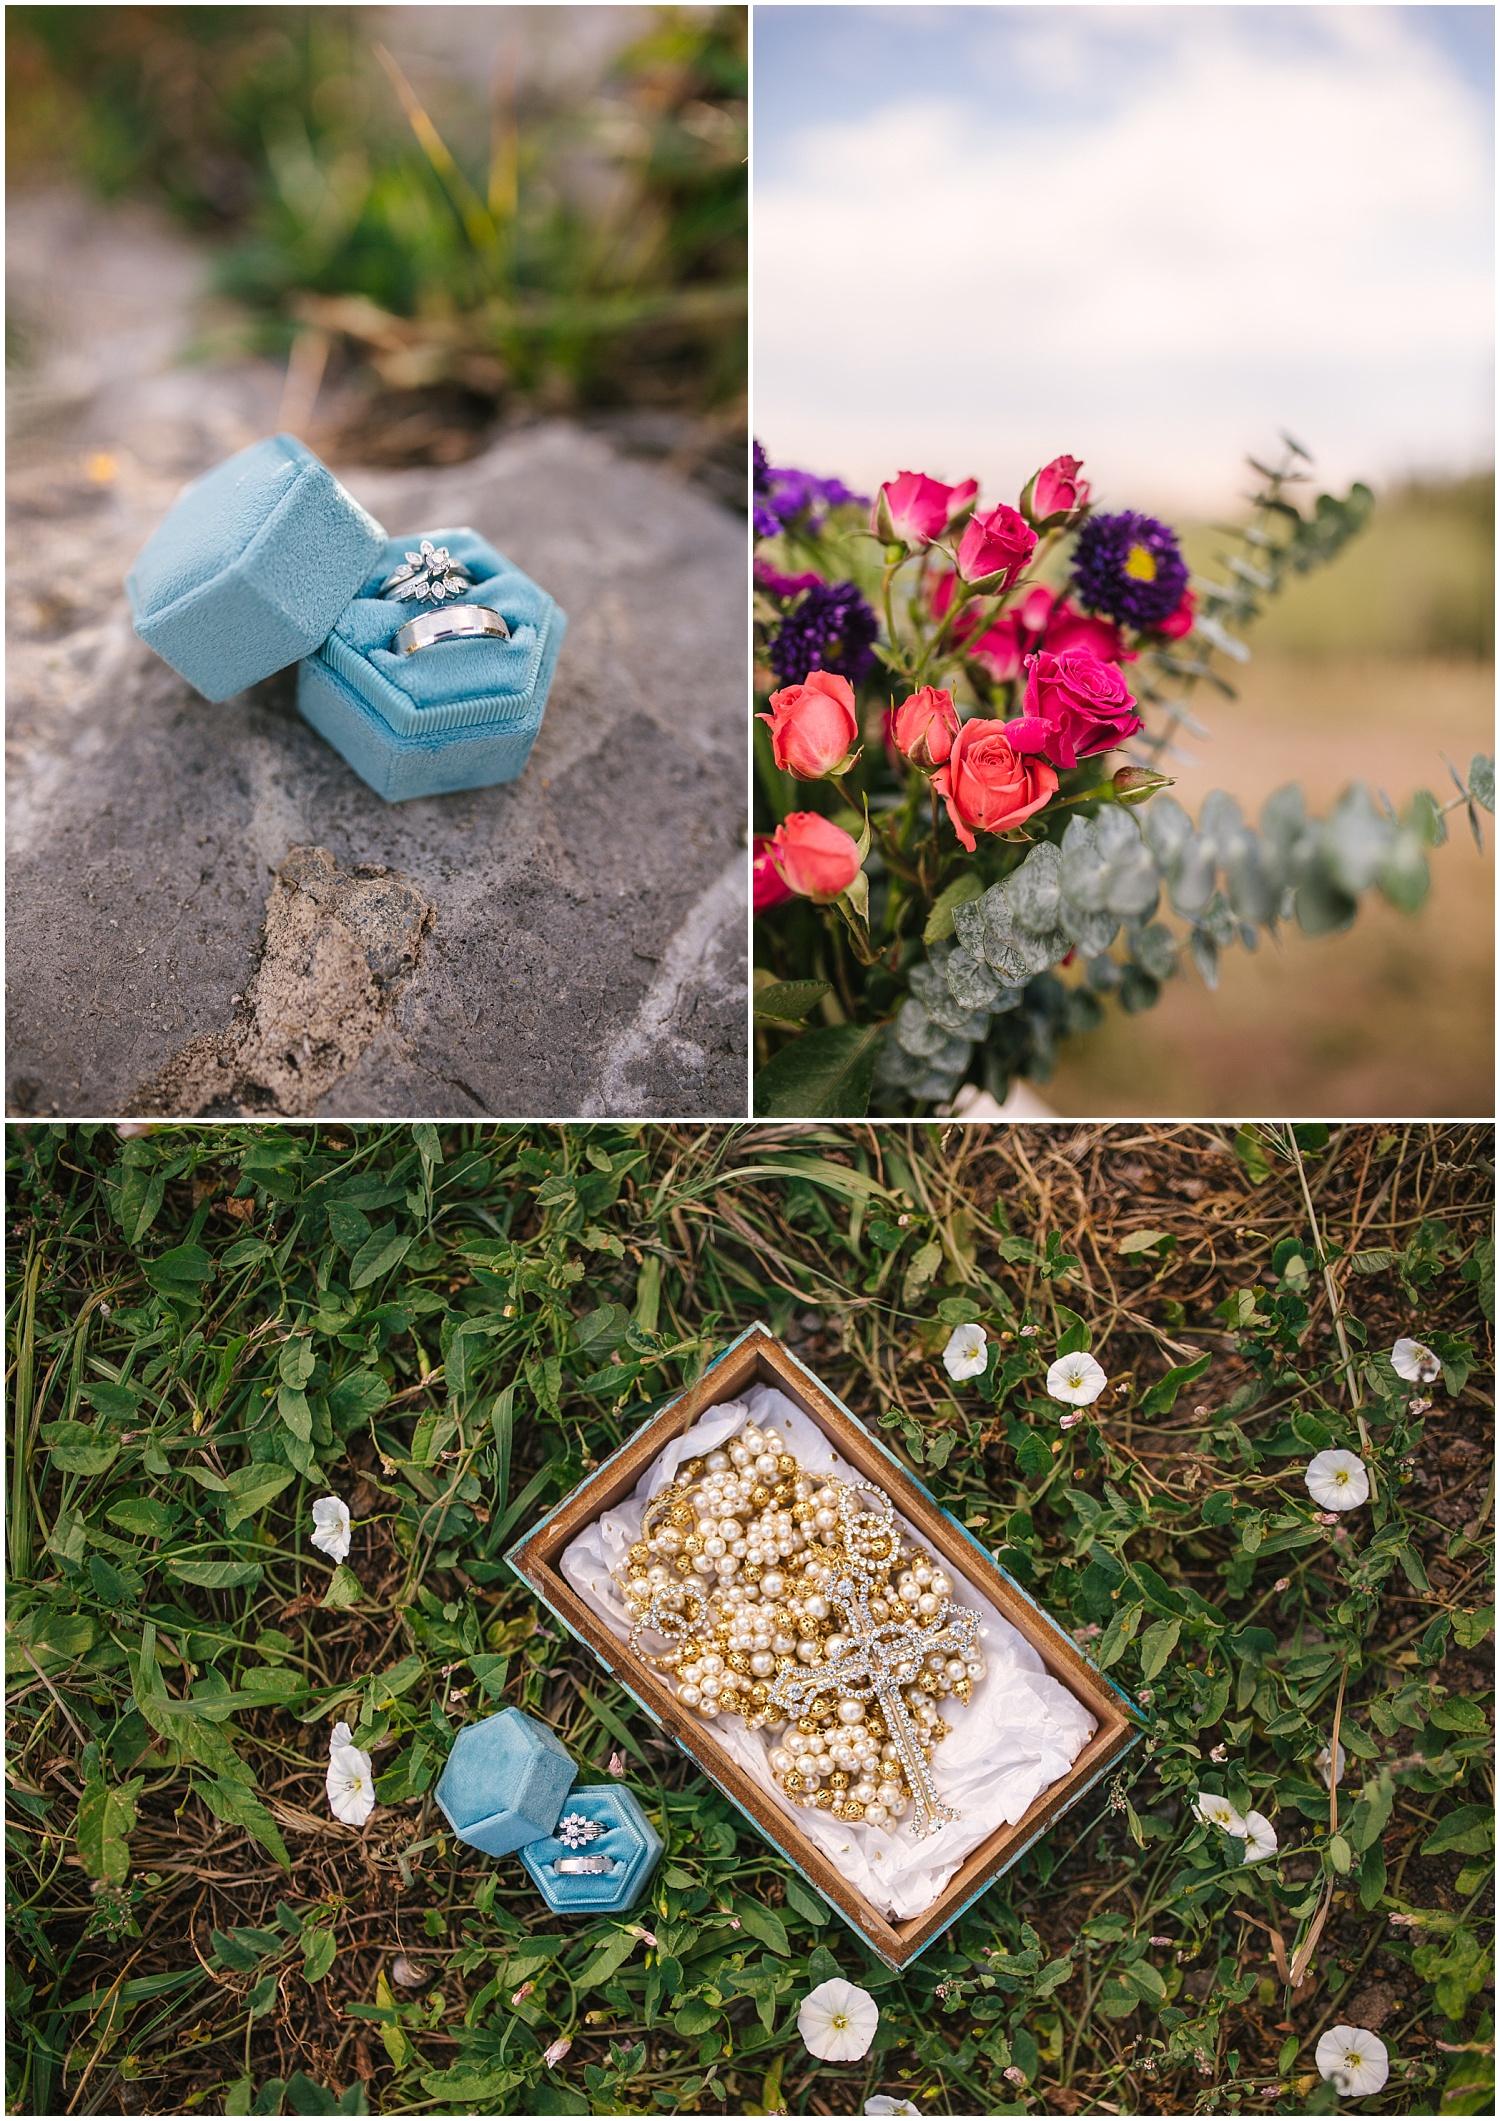 Wedding rings with flowers and rosary for elopement in Sandia mountains